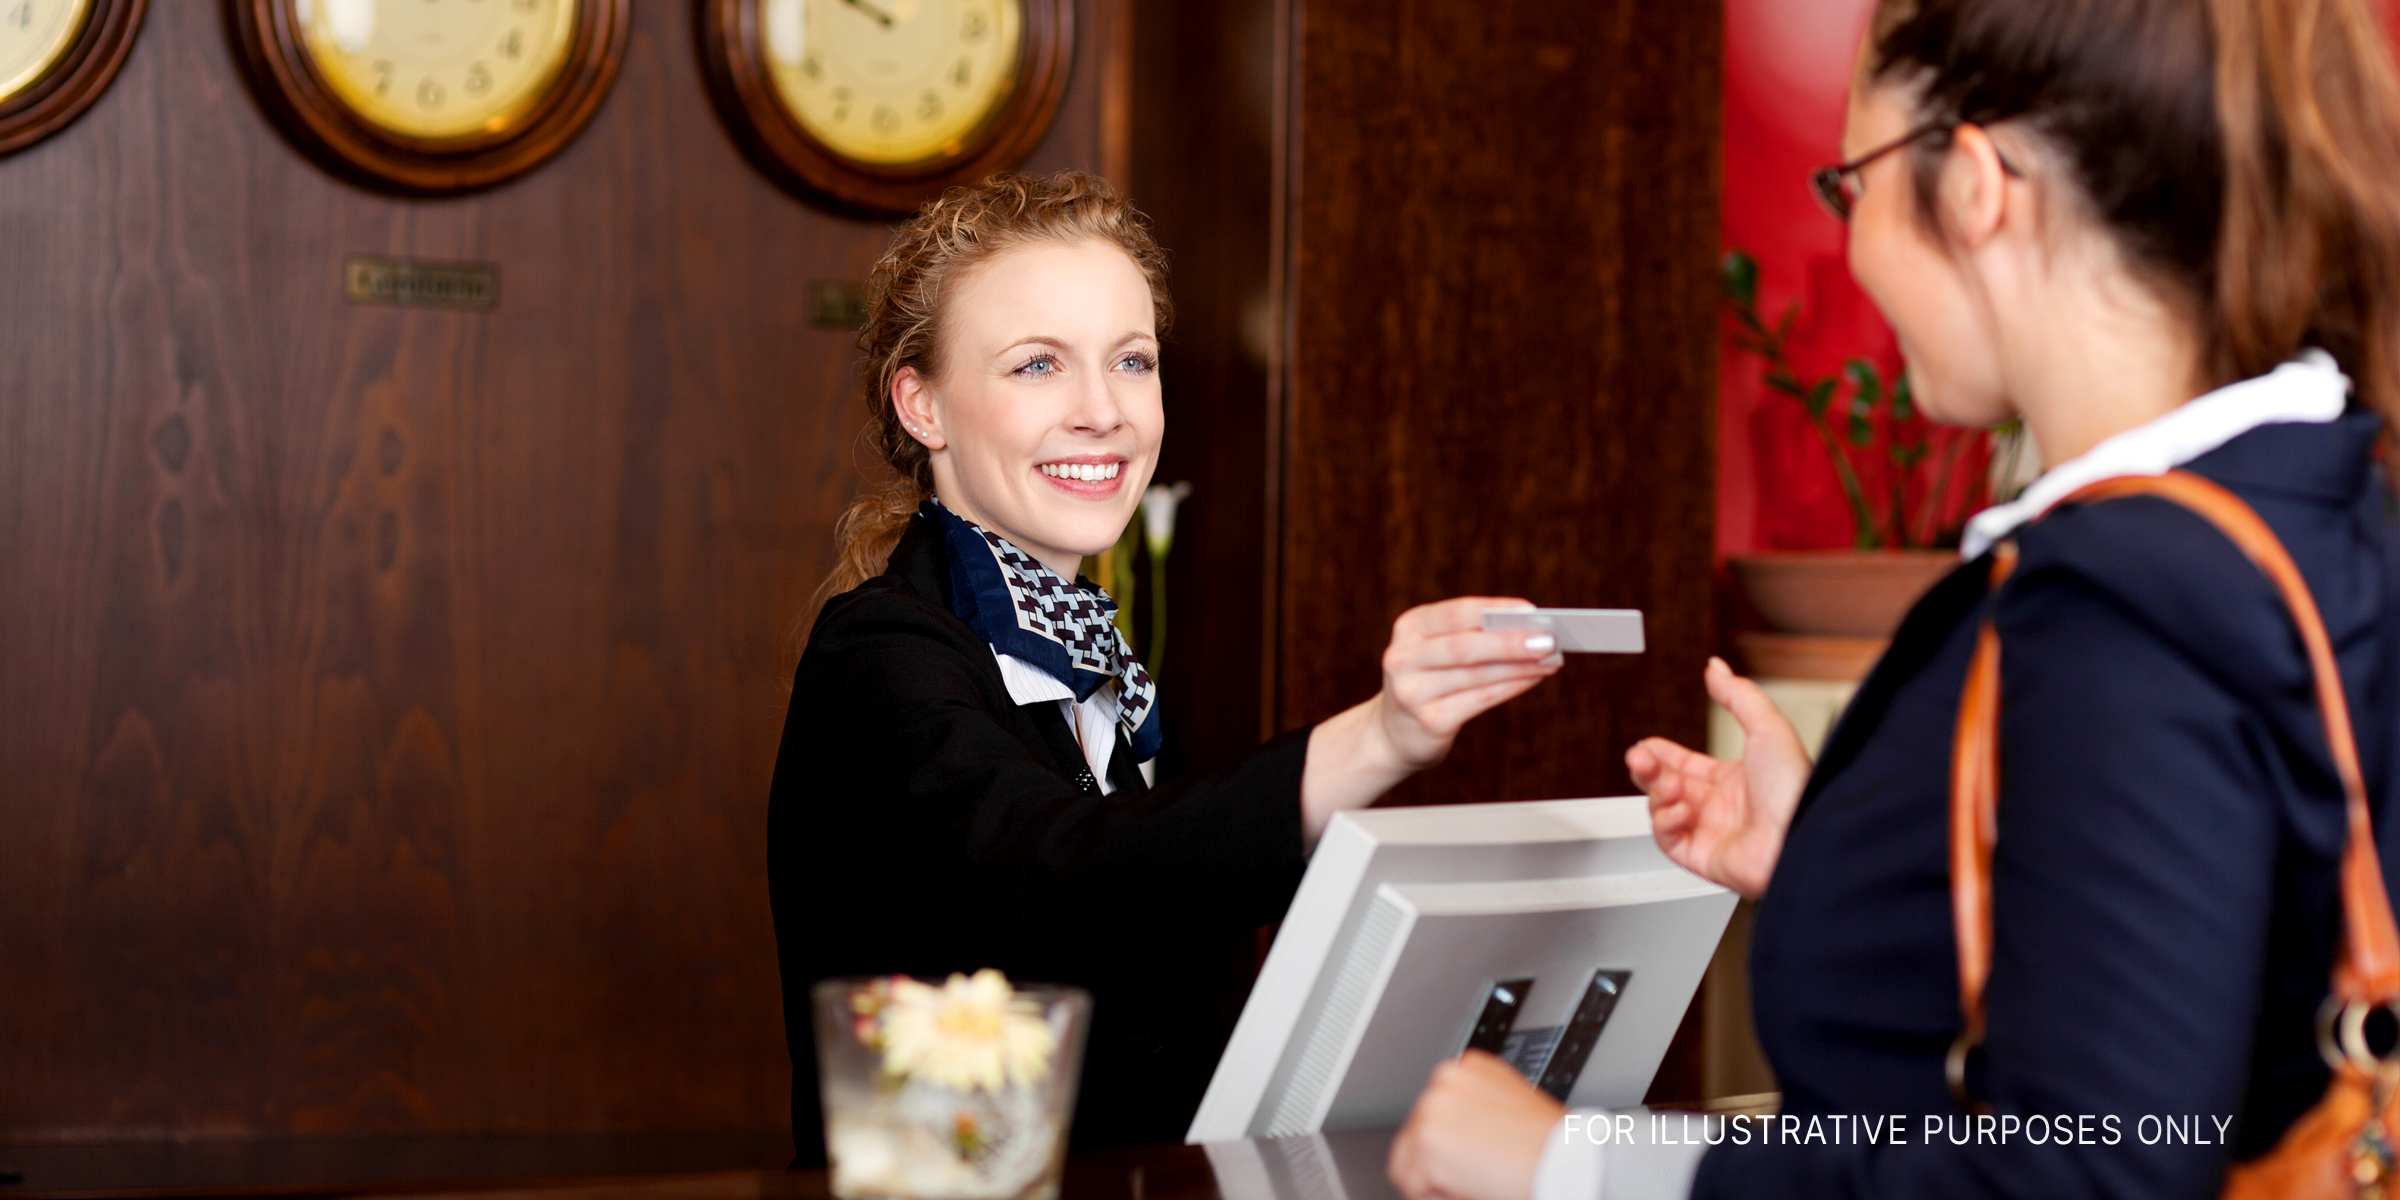 A reception at a hotel | Source: Shutterstock